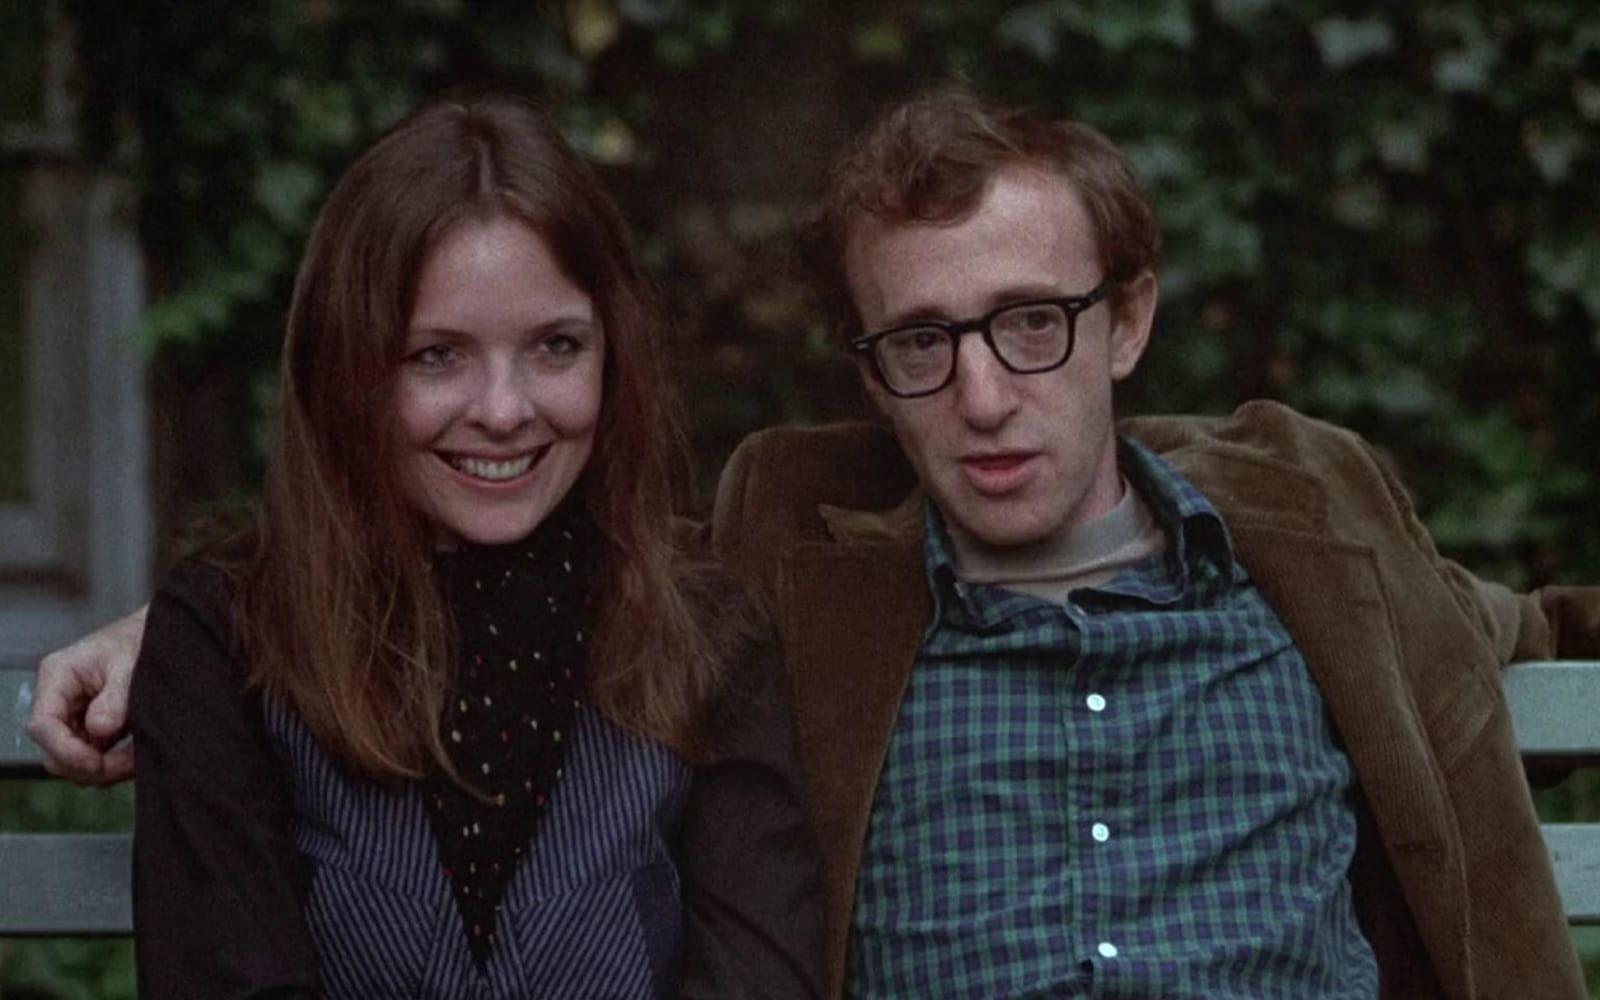 ”Love is too weak a word for what I feel - I luuurve you, you know, I loave you, I luff you, two F’s.” - Alvy (Woody Allen) till Annie (Diane Keaton) i ”Annie Hall” från 1977. Foto: MGM